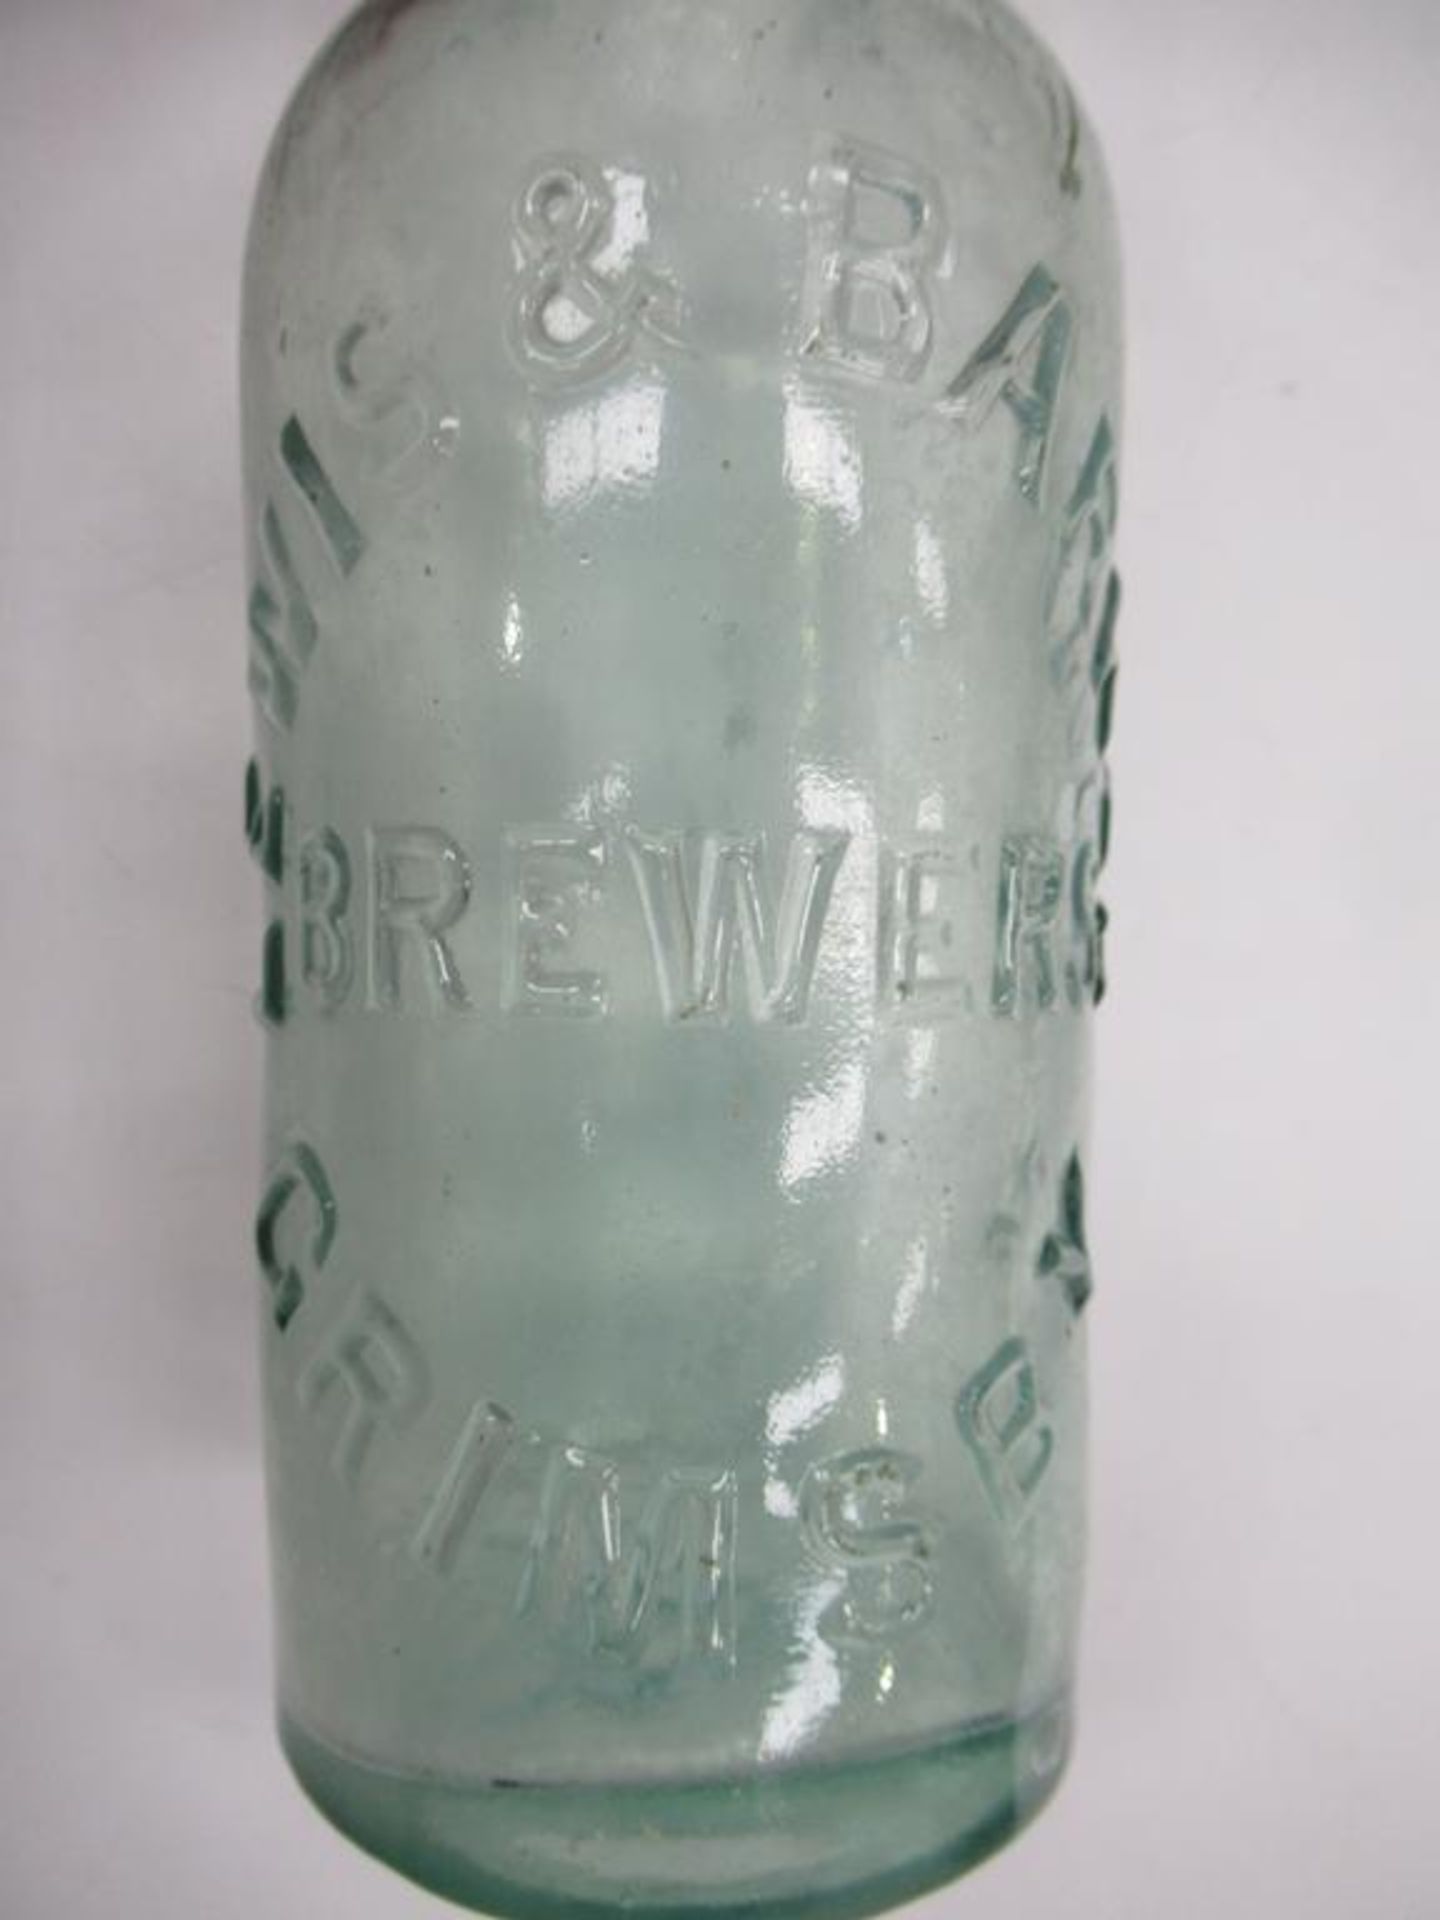 4x Grimsby E.A Lewis (1) and Lewis & Barker (3) bottles - Image 10 of 12